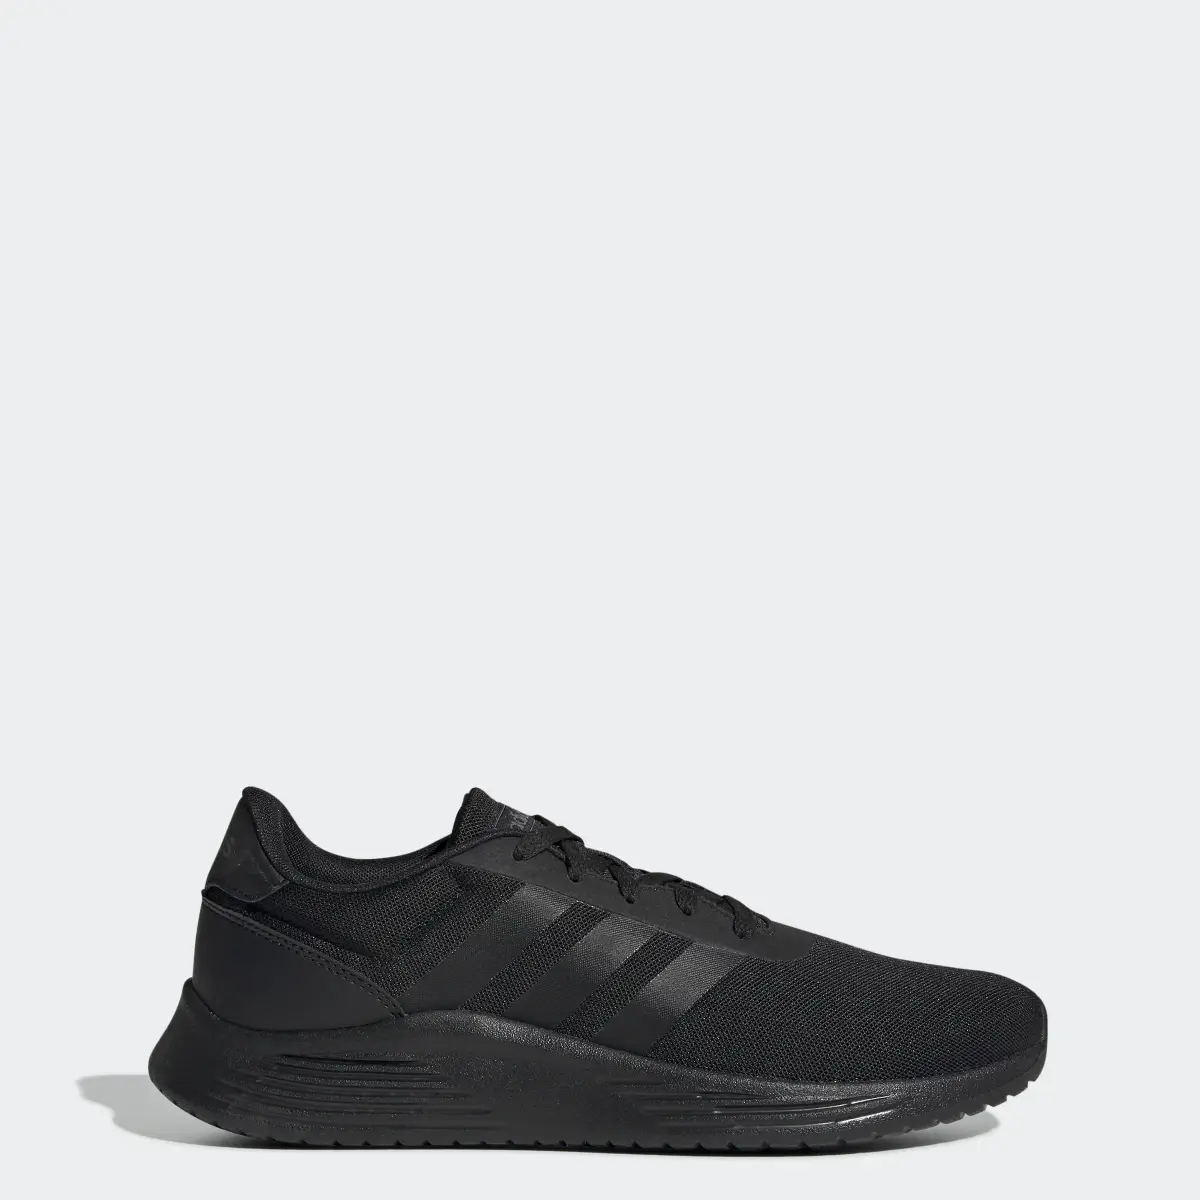 Adidas Lite Racer 2.0 Shoes. 1